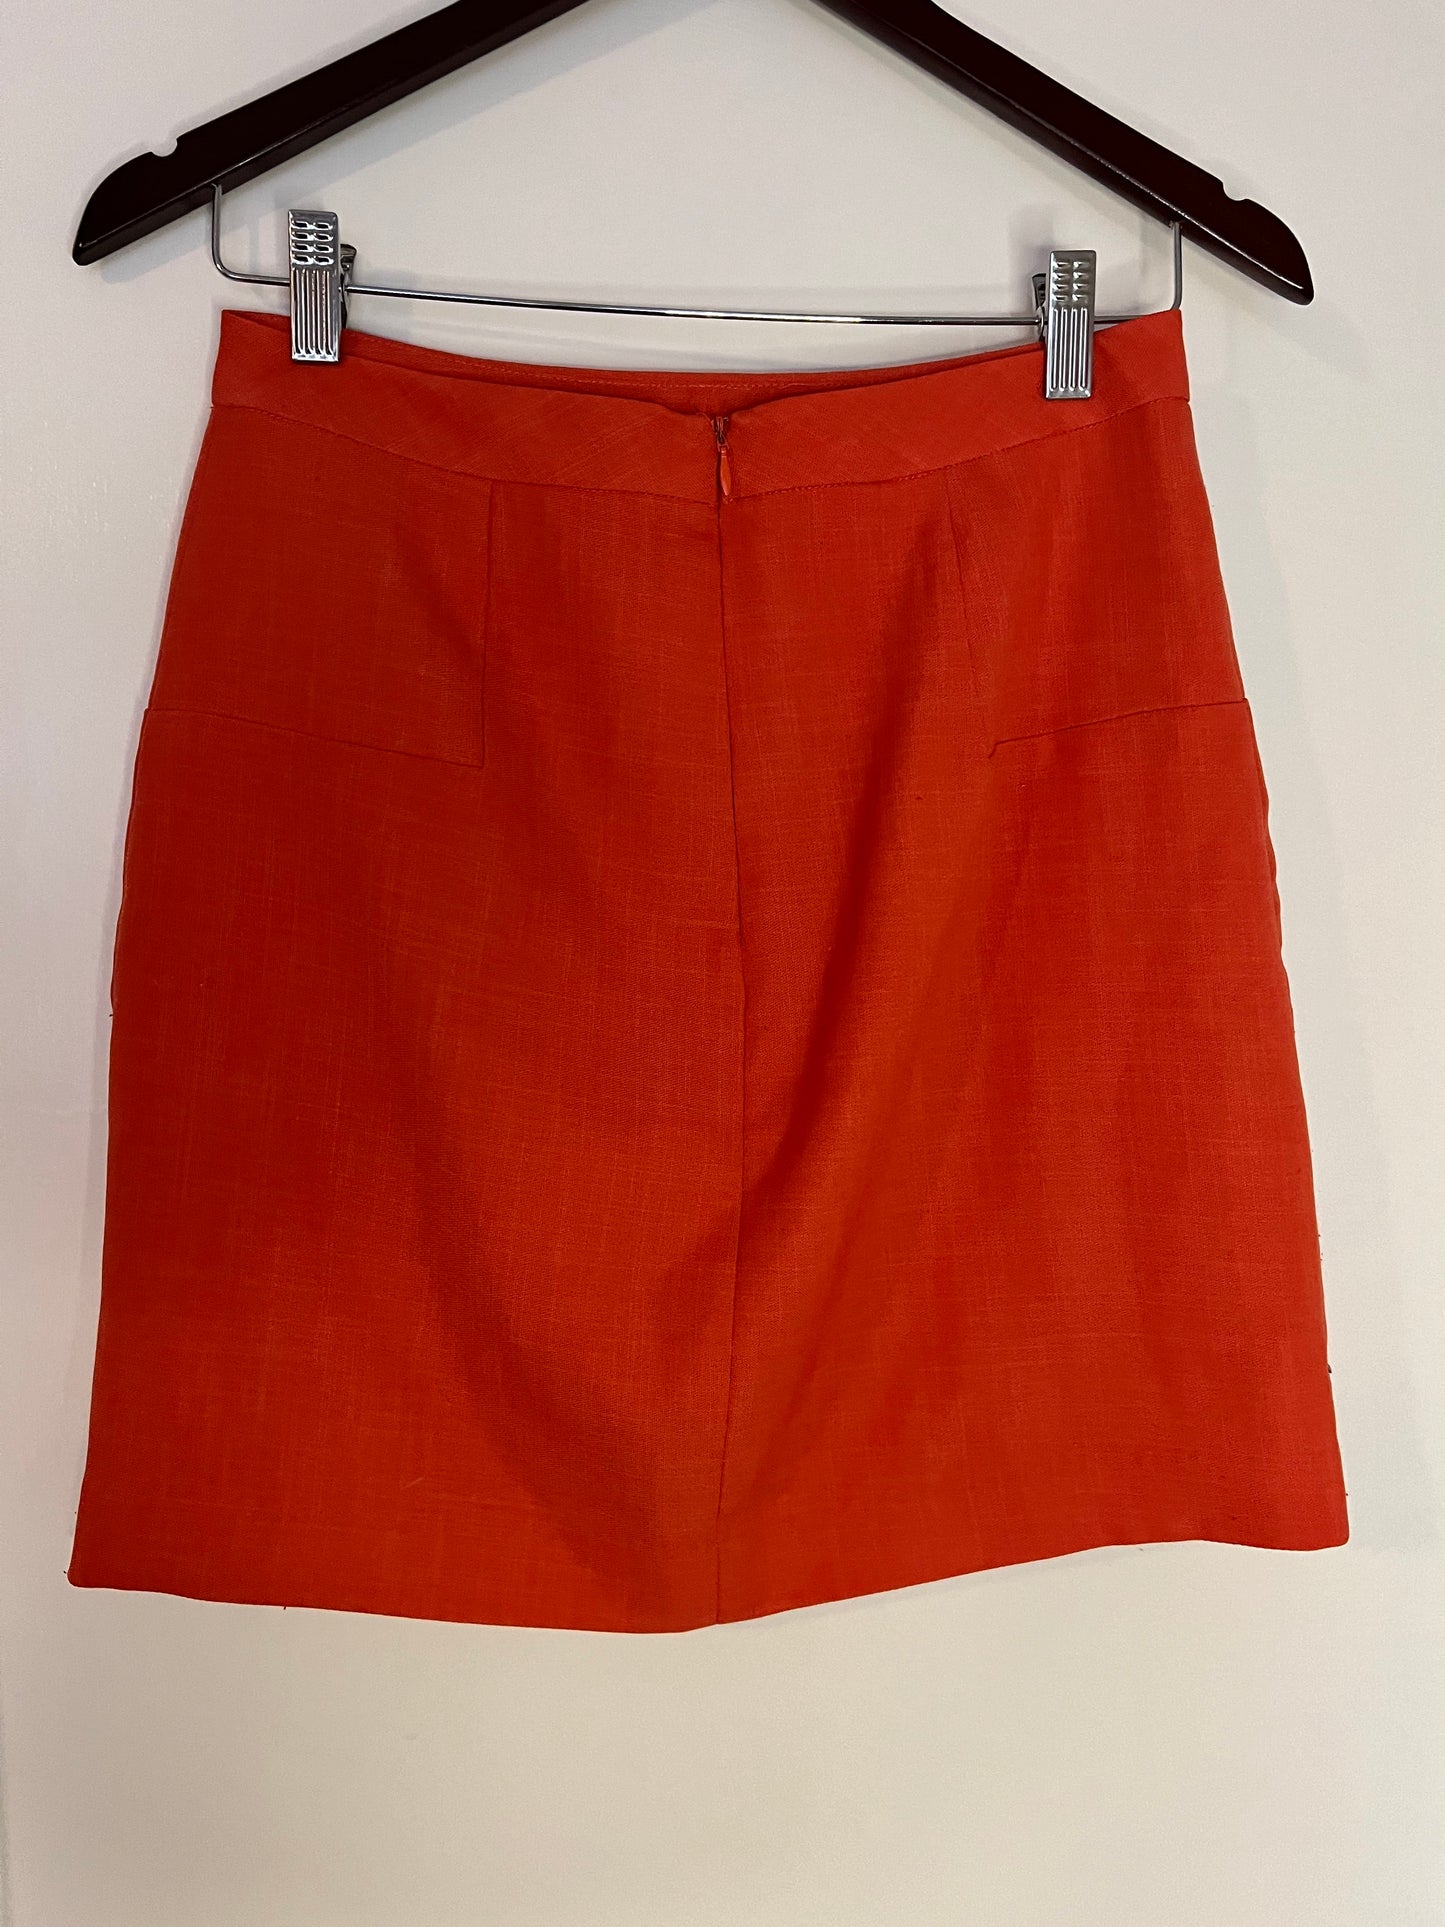 C-lective Coral Short Skirt Size 2 EUC PPU 45208 or Spring Sale